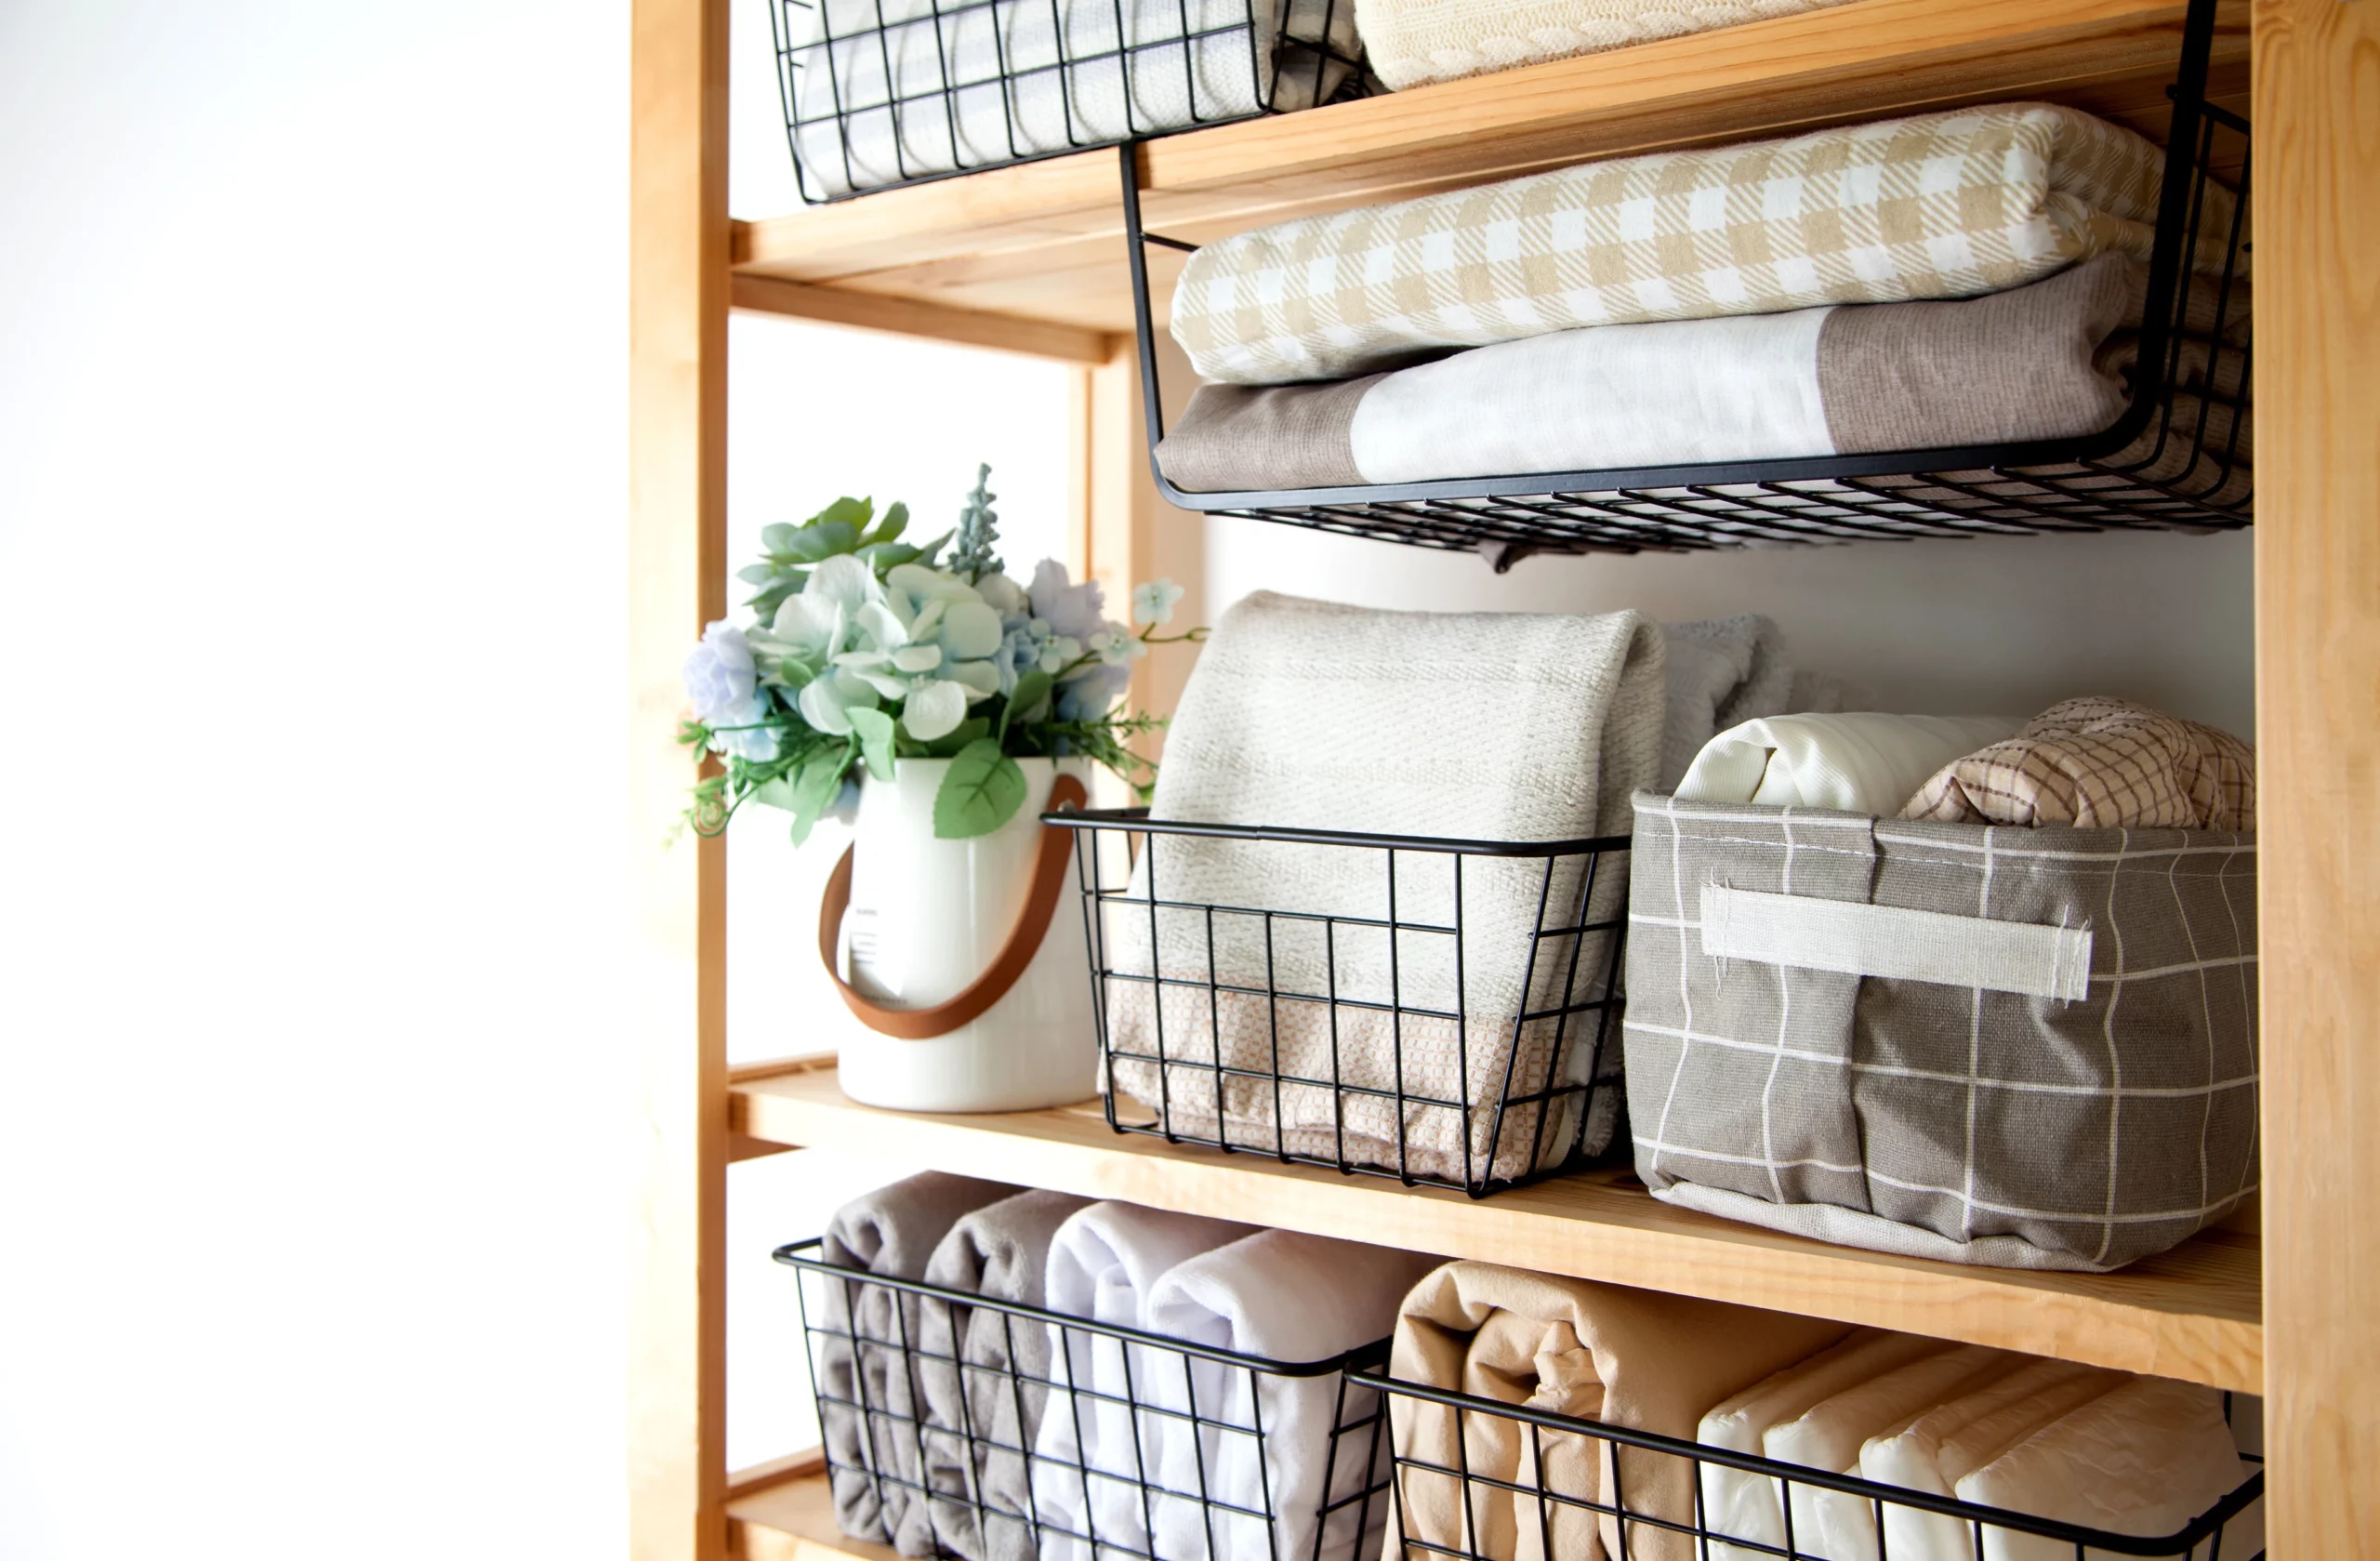 How to Organize a Linen Closet: A Step-by-Step Guide